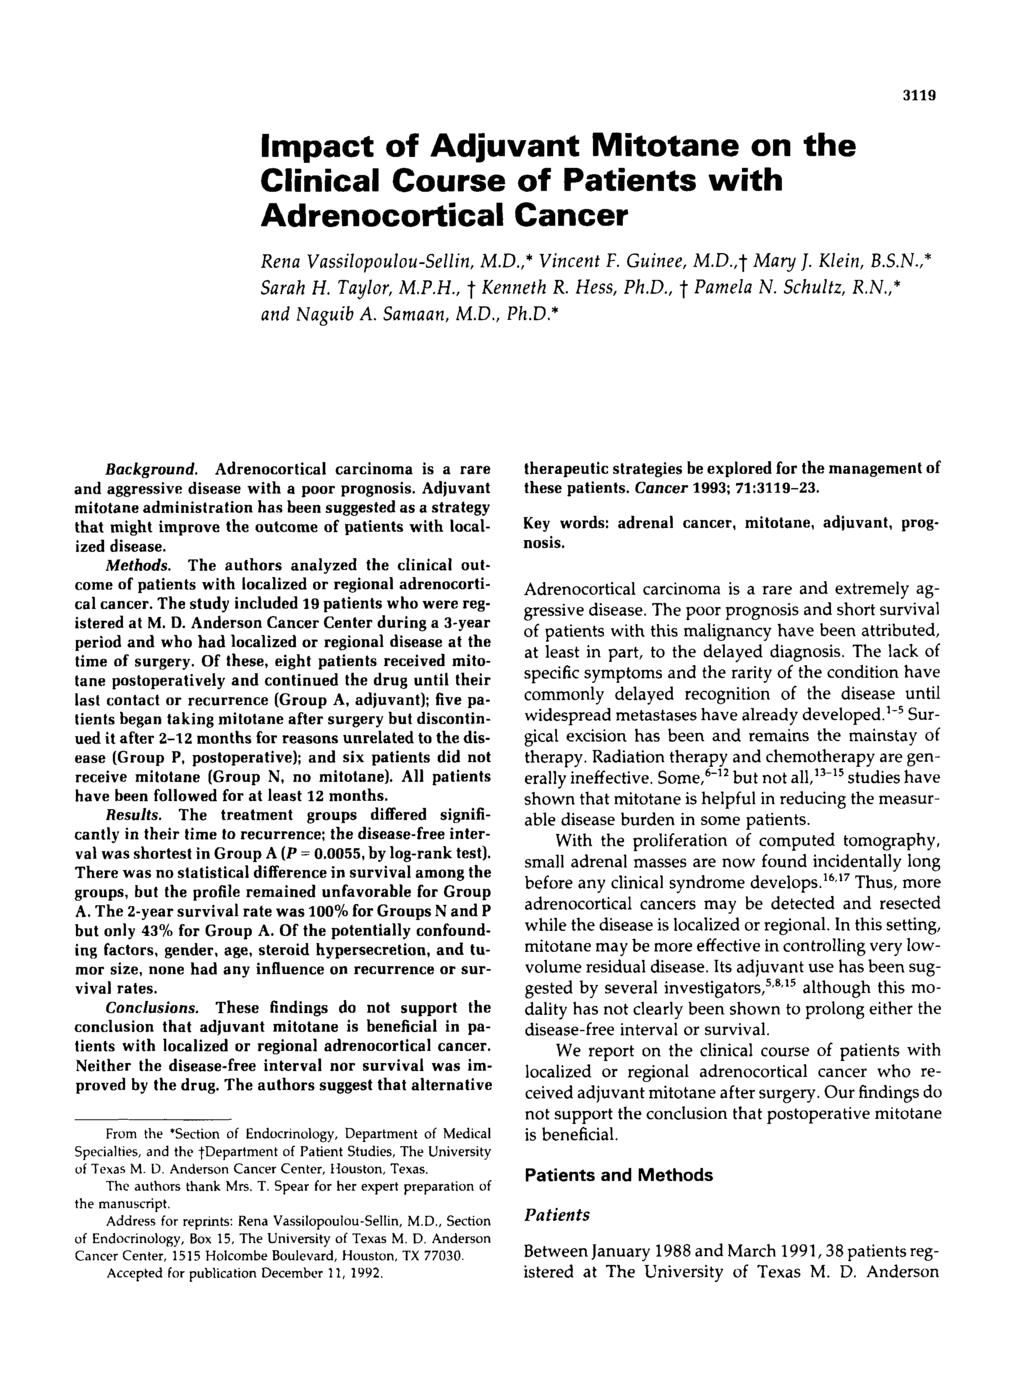 Impact of Adjuvant Mitotane on the Clinical Course of Patients with Adrenocortical Cancer Rena Vassilopoulou-Sellin, M.D.,* Vincent F. Guinee, M.D.,t May 1. Klein, B.S.N.,* Sarah H. Taylor, M.P.H., t Kenneth R.